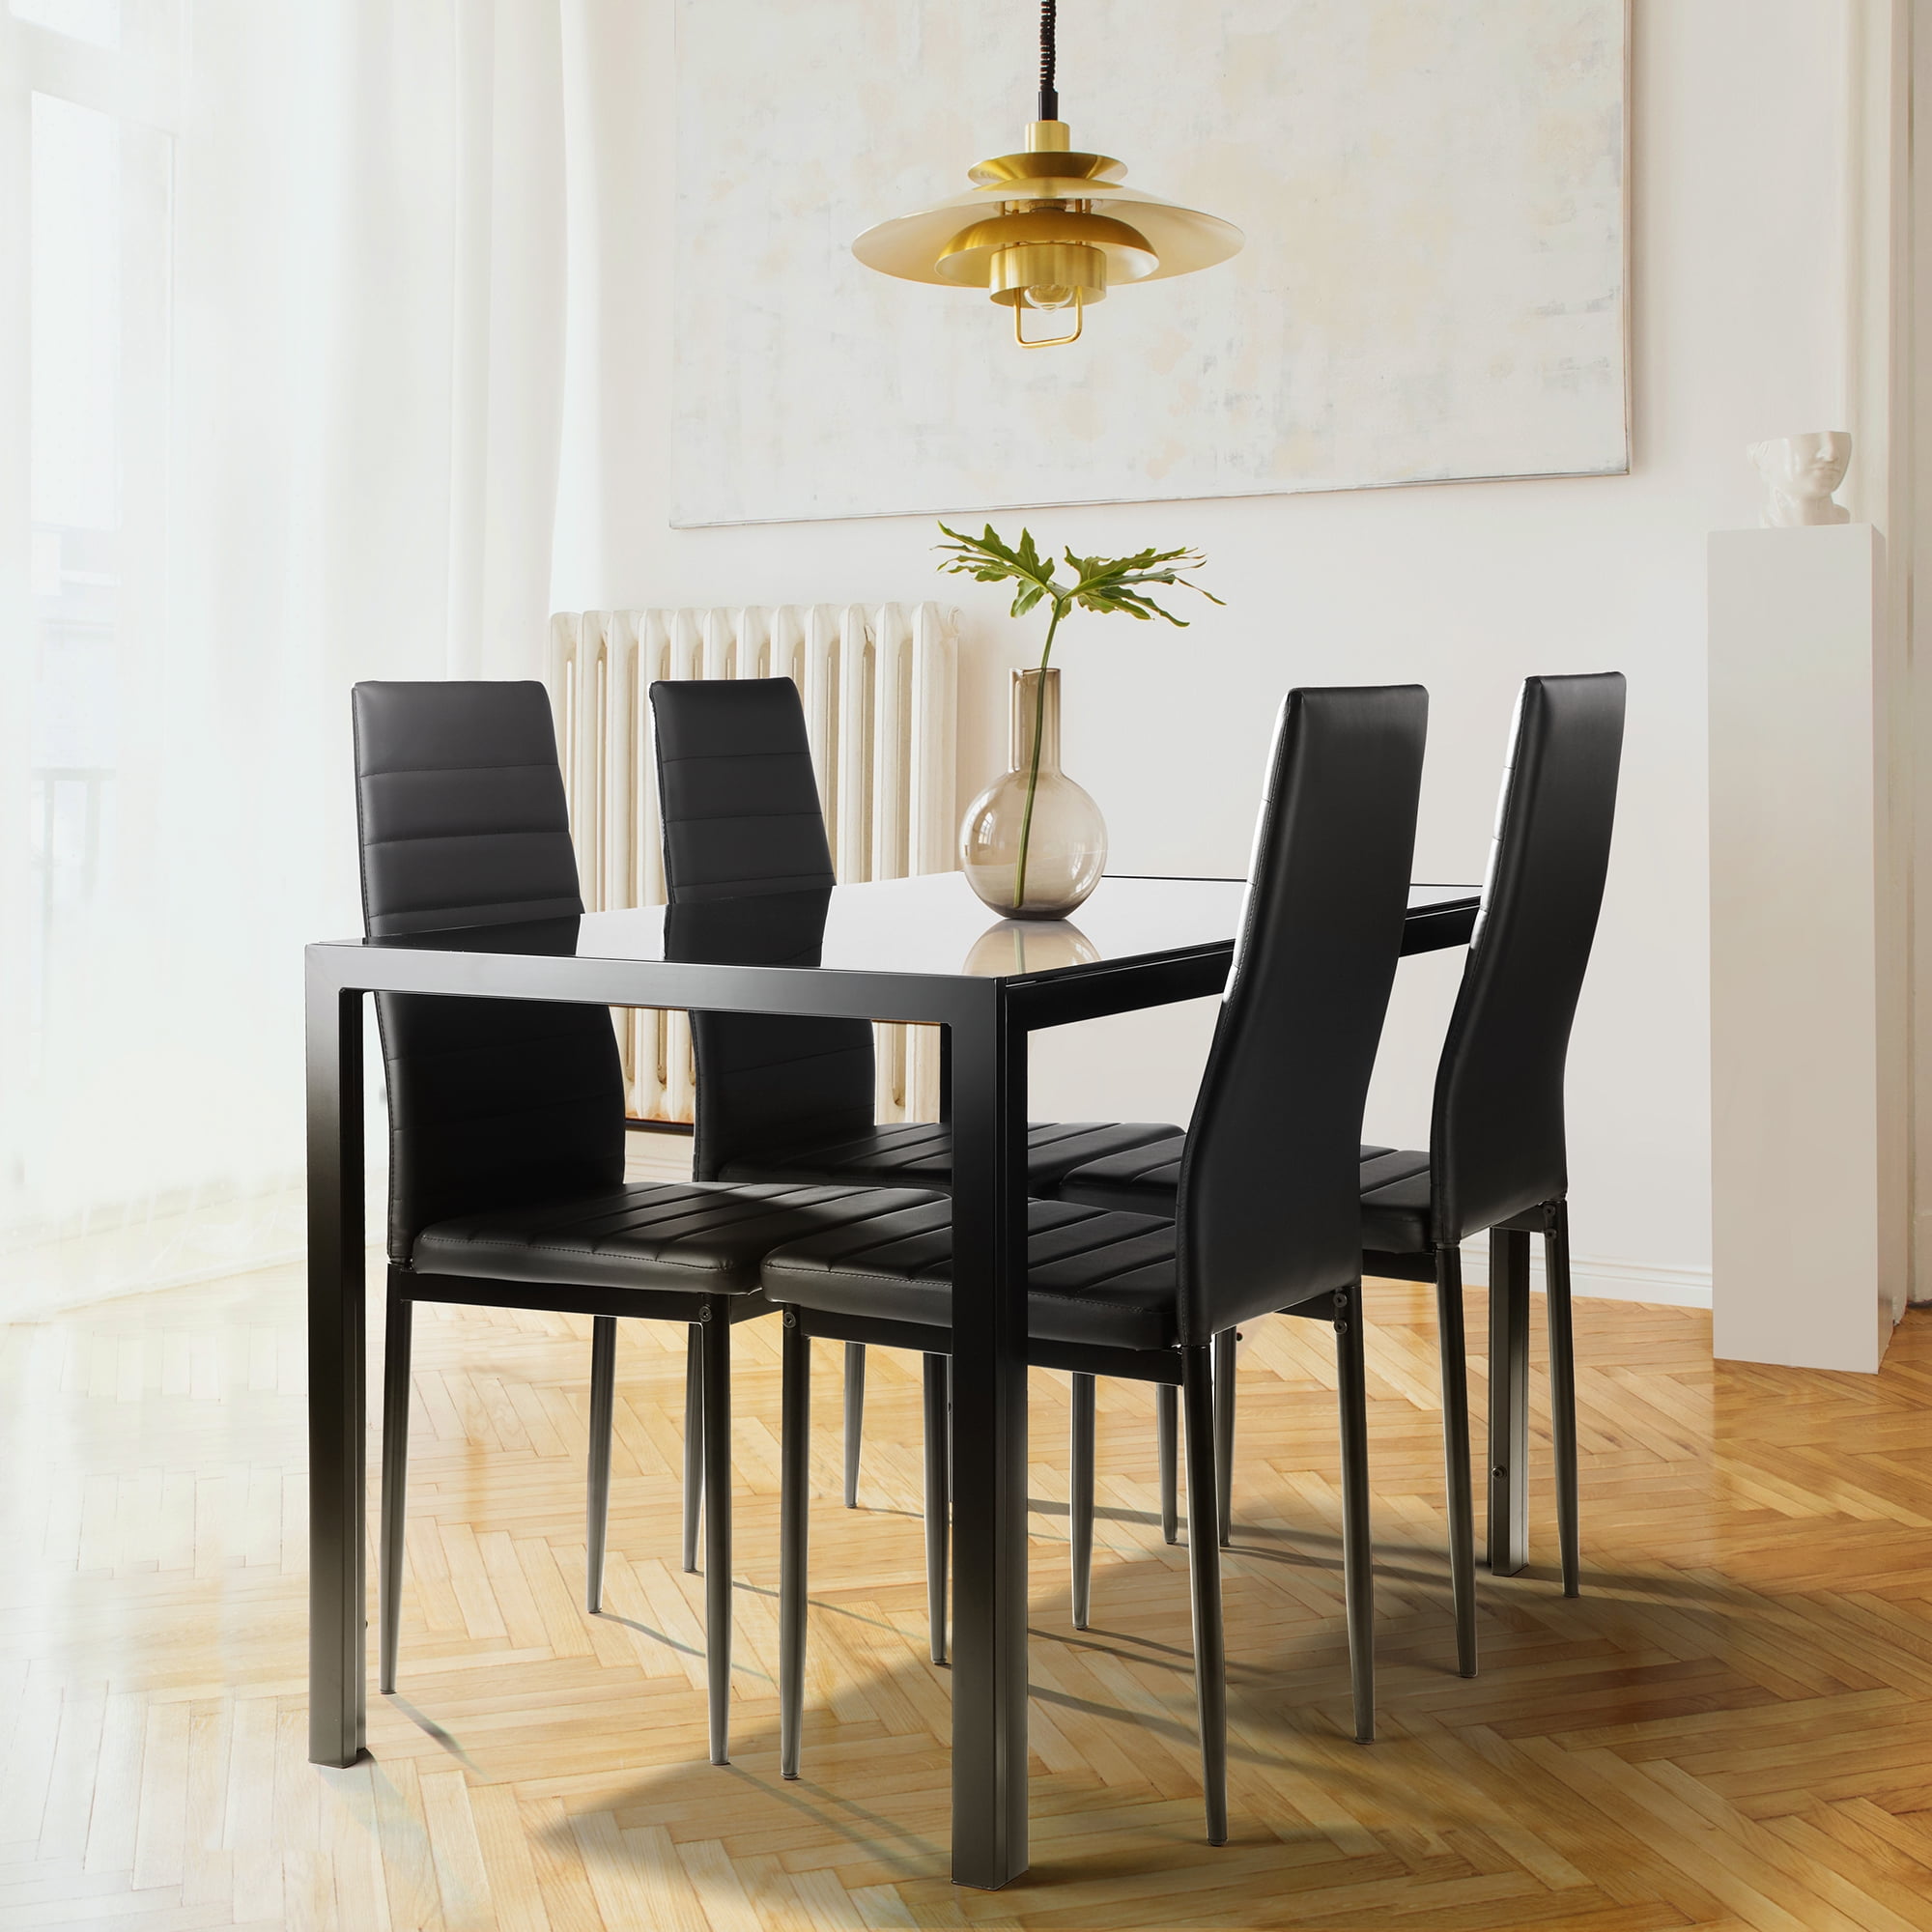 5 Pieces Dining Table Set for 4,Kitchen Room Tempered Glass Dining